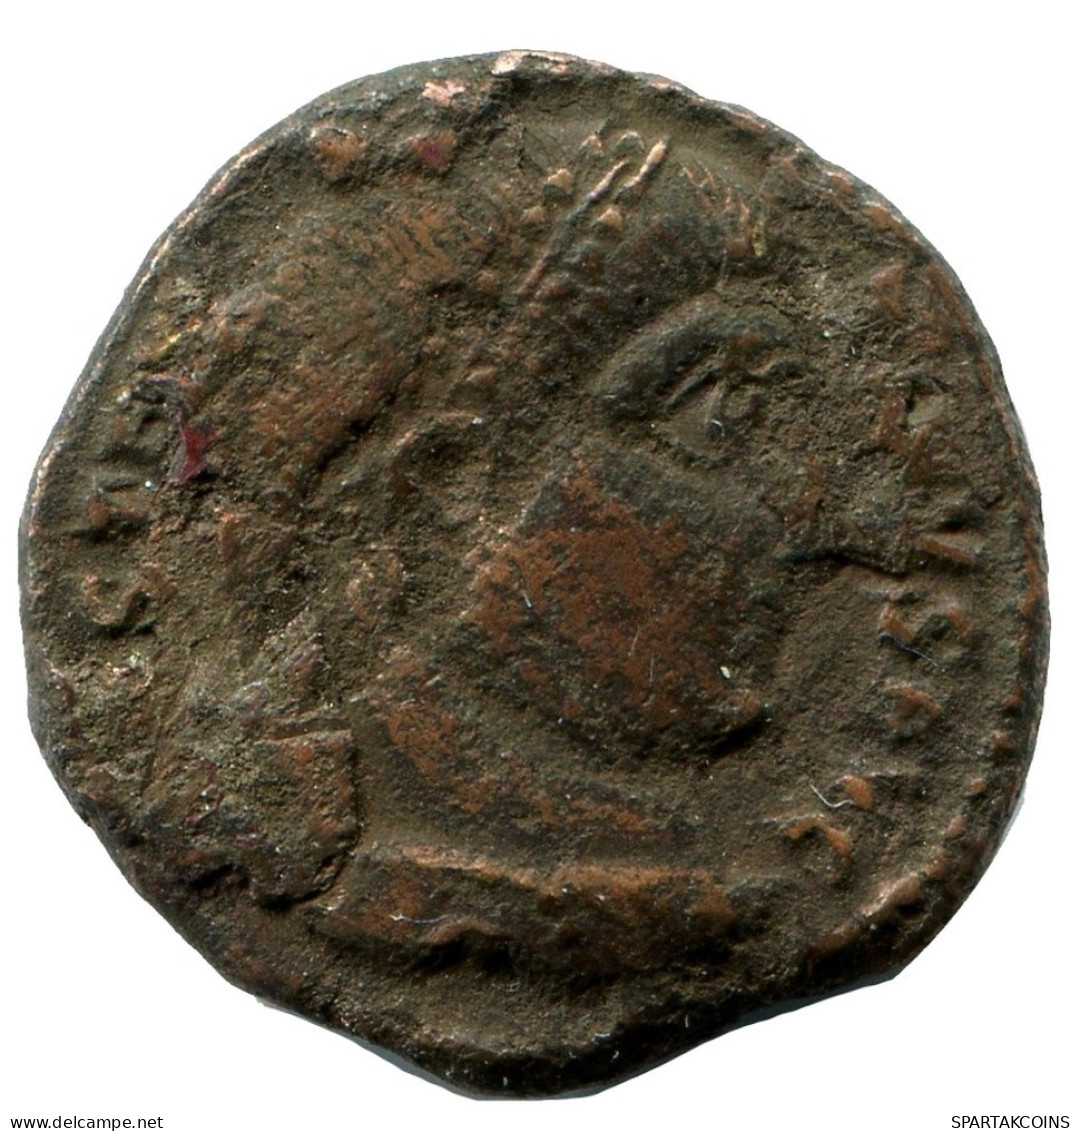 CONSTANTINE I MINTED IN HERACLEA FOUND IN IHNASYAH HOARD EGYPT #ANC11218.14.E.A - The Christian Empire (307 AD To 363 AD)